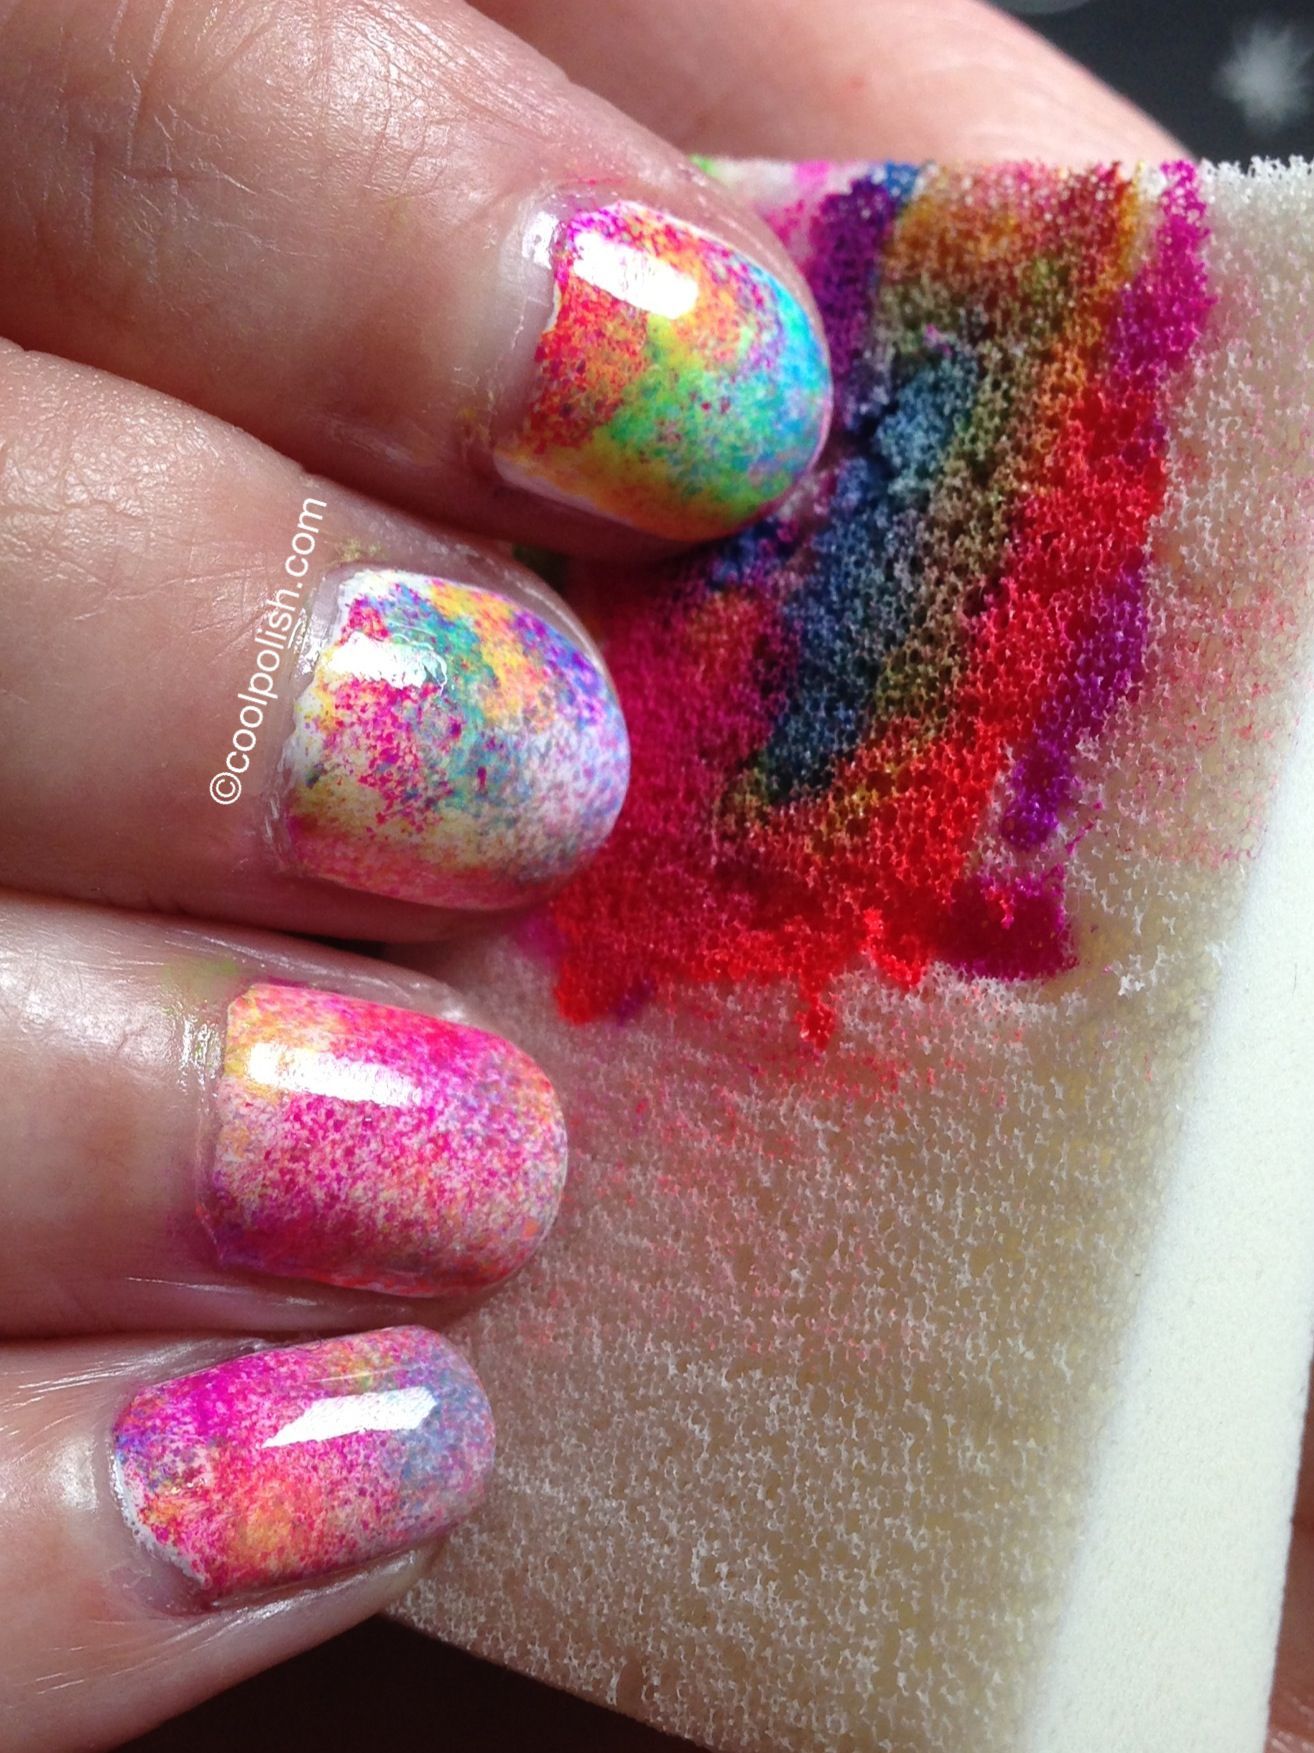 tie dye nails diy – could also do with dark colors to look like the galaxy!  I l